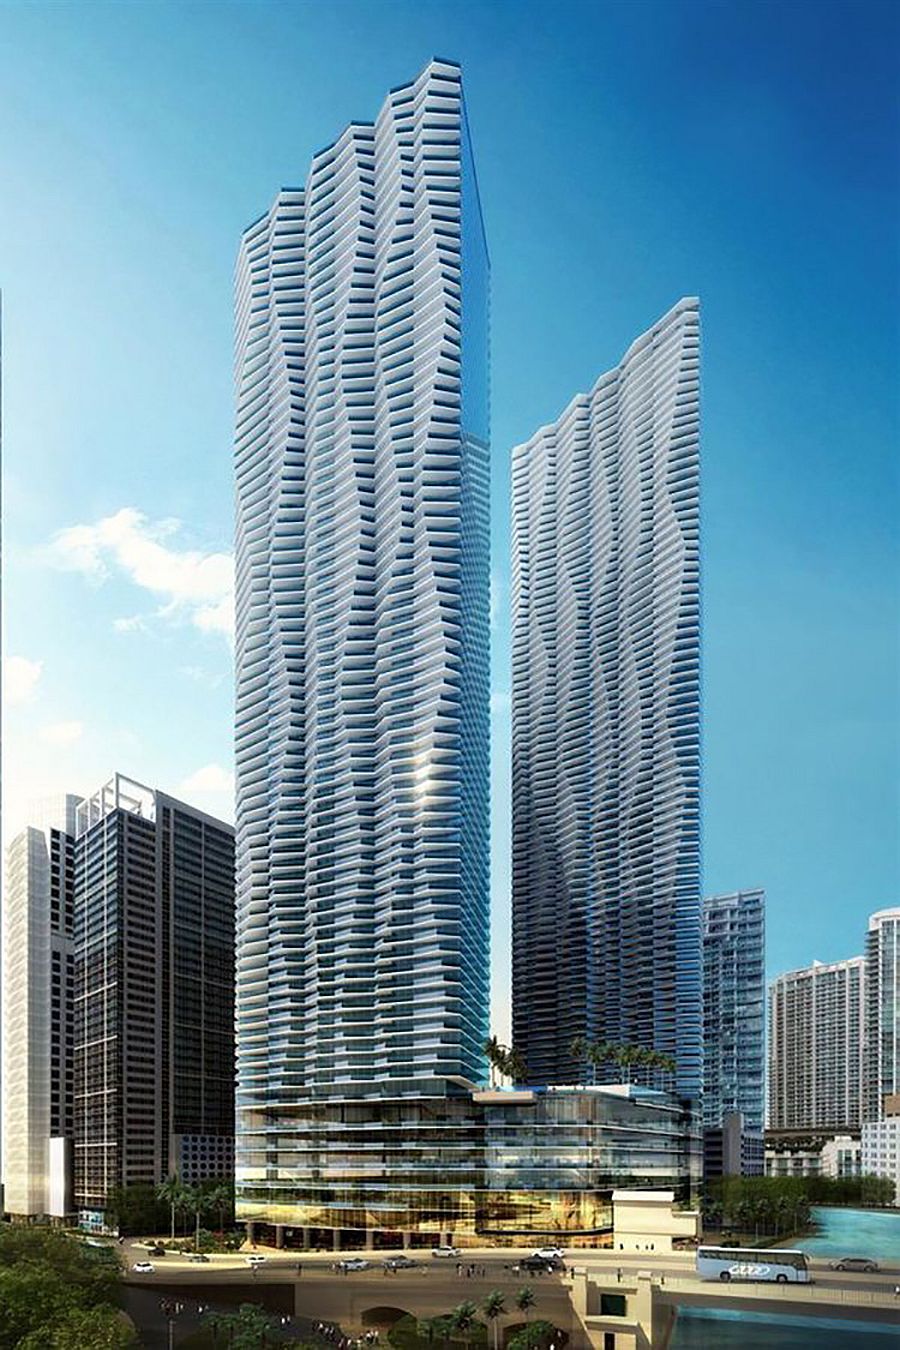 One Brickell offers luxury condos that deliver the very best of Downtown Miami and its unmatched lifestyle